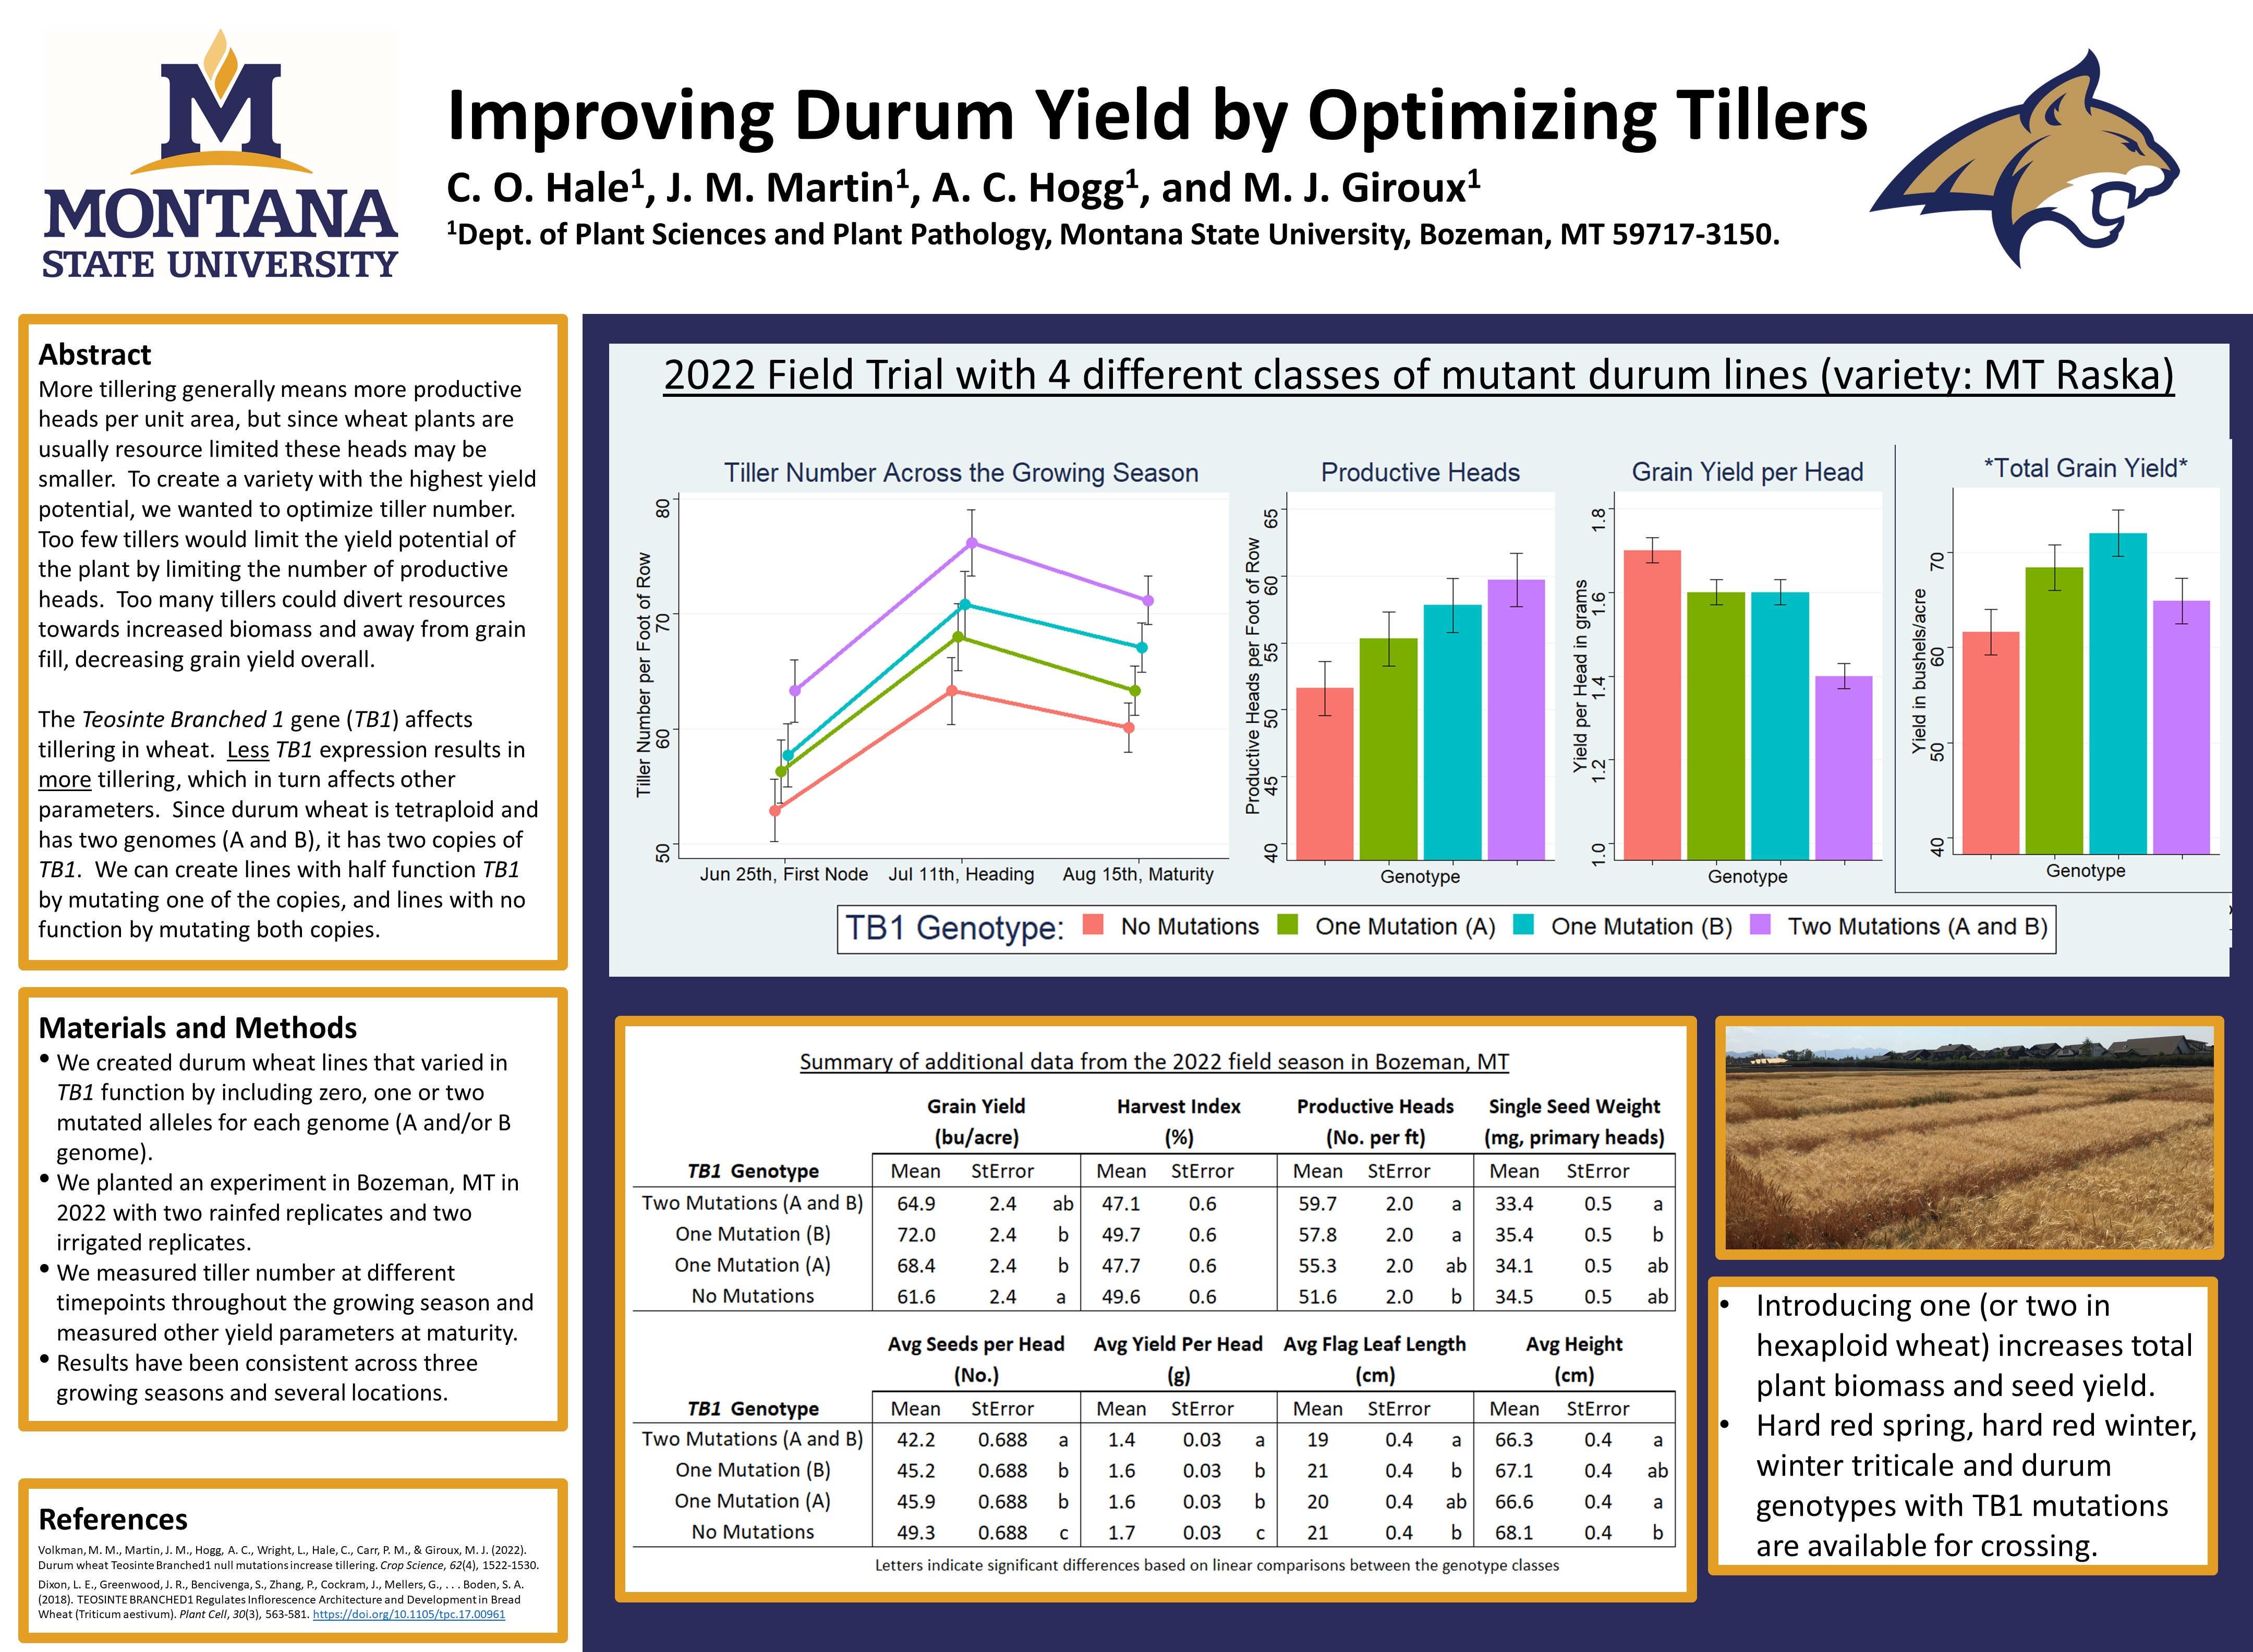 Poster: Improving Durum Yield by Optimizing Tillers